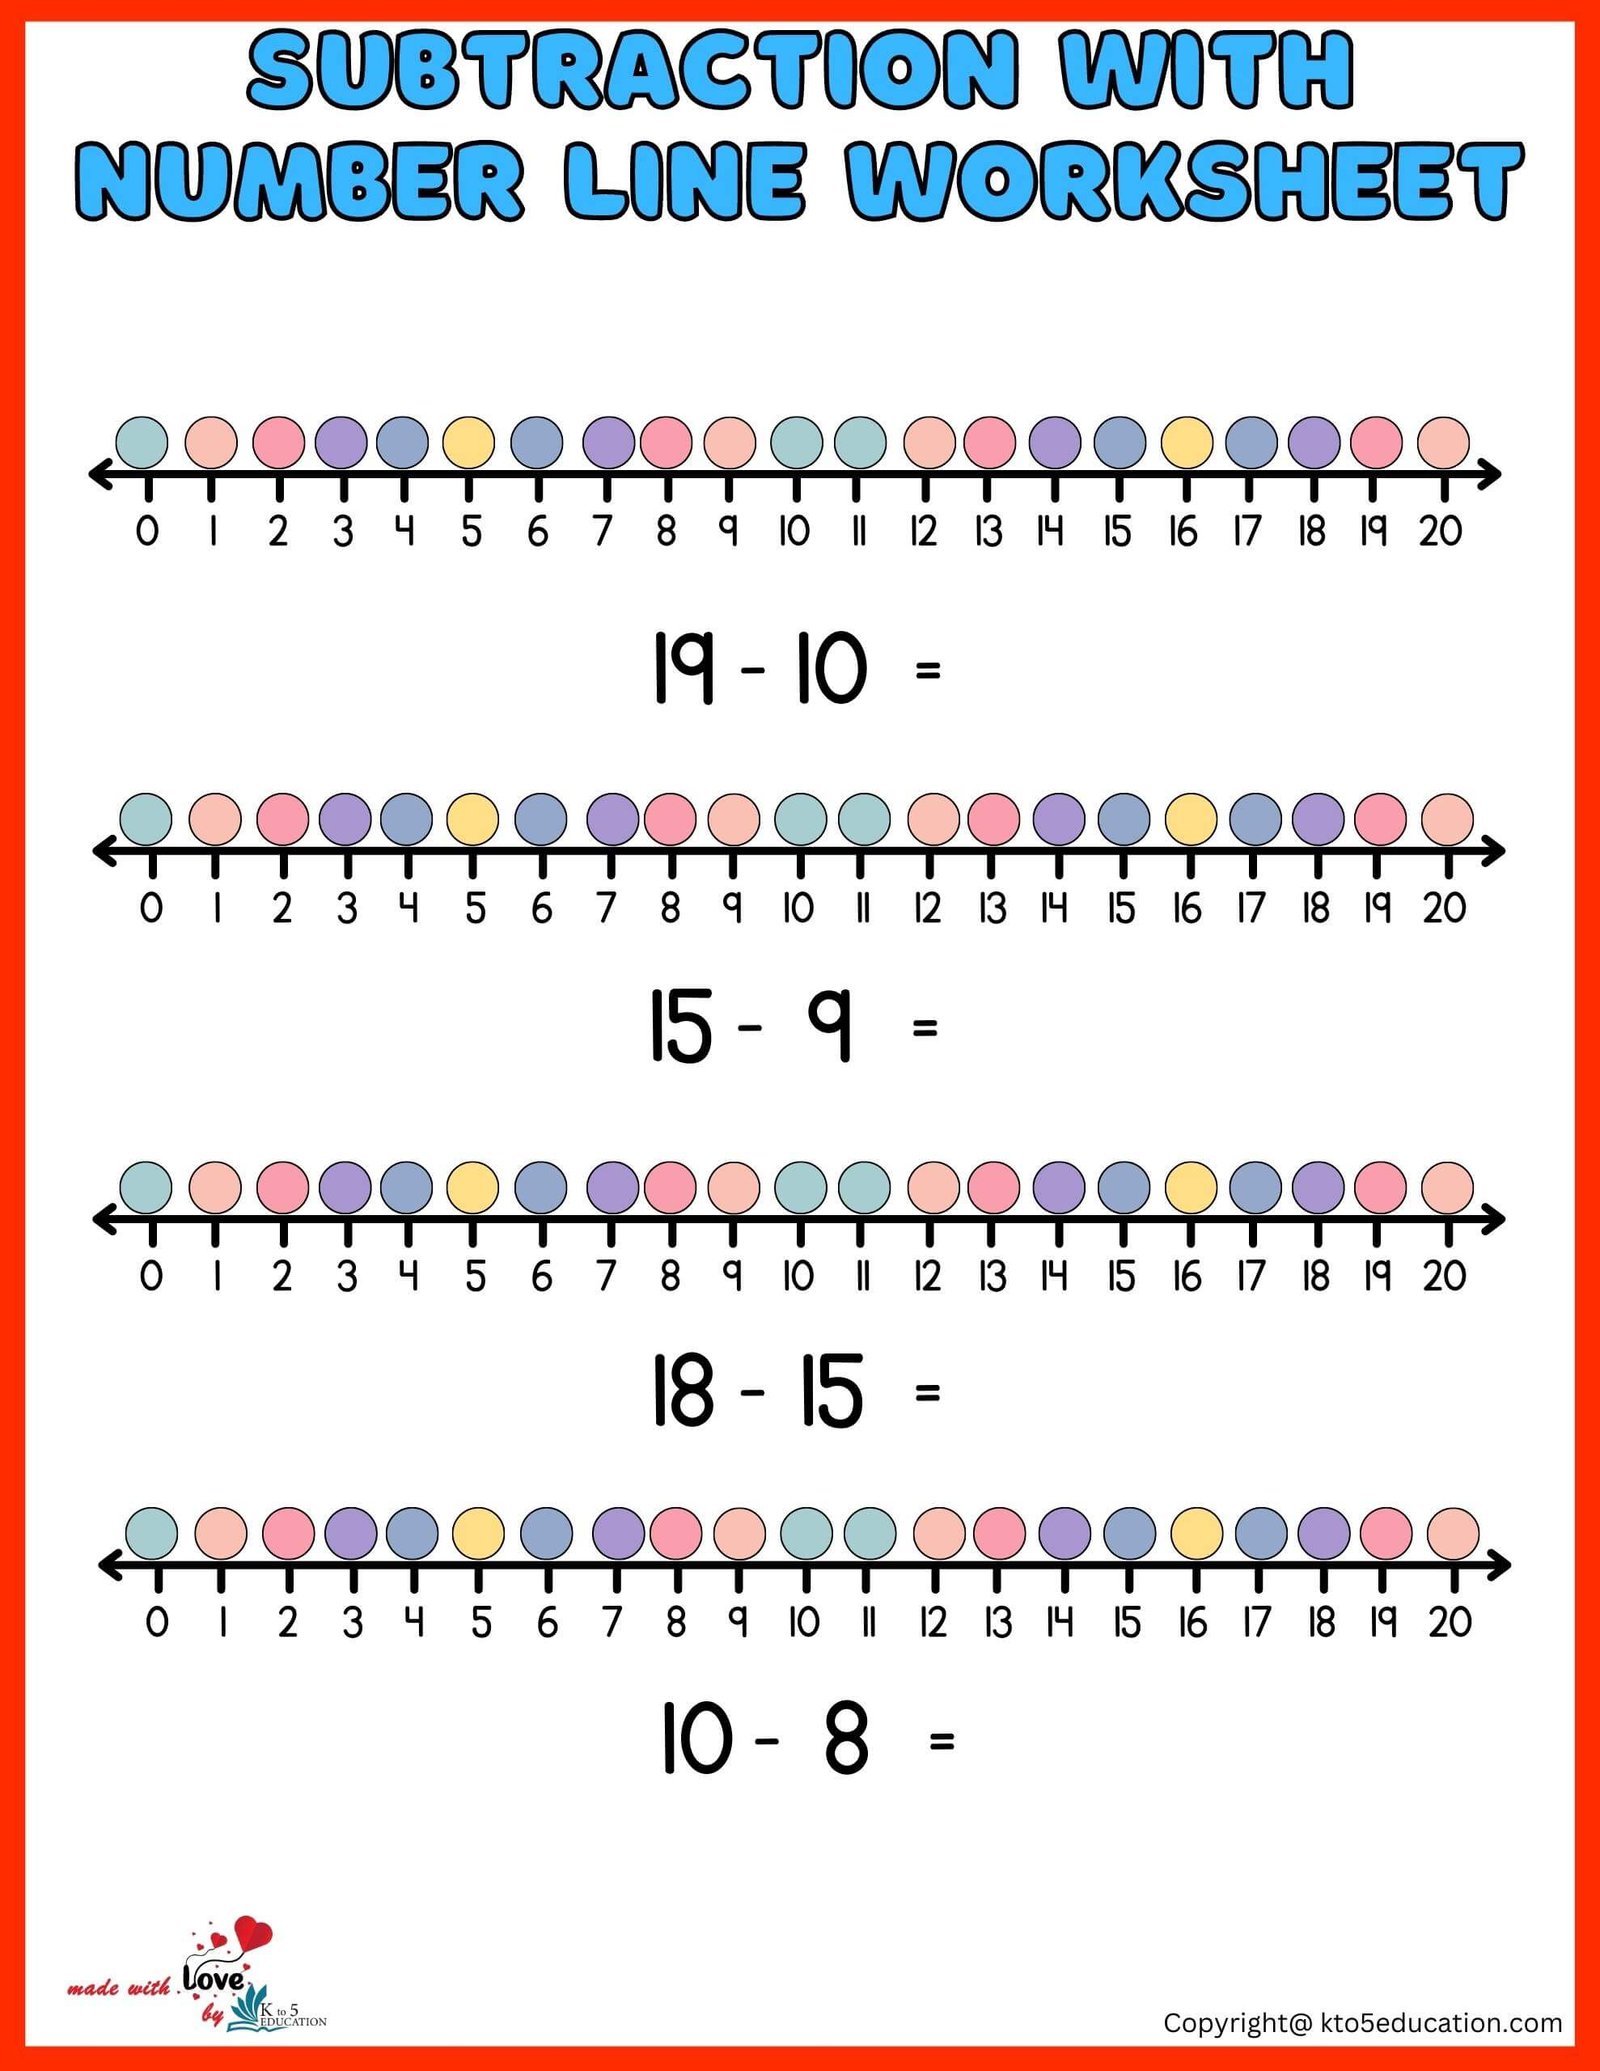 Free Subtraction With Number Line Worksheet 1-20